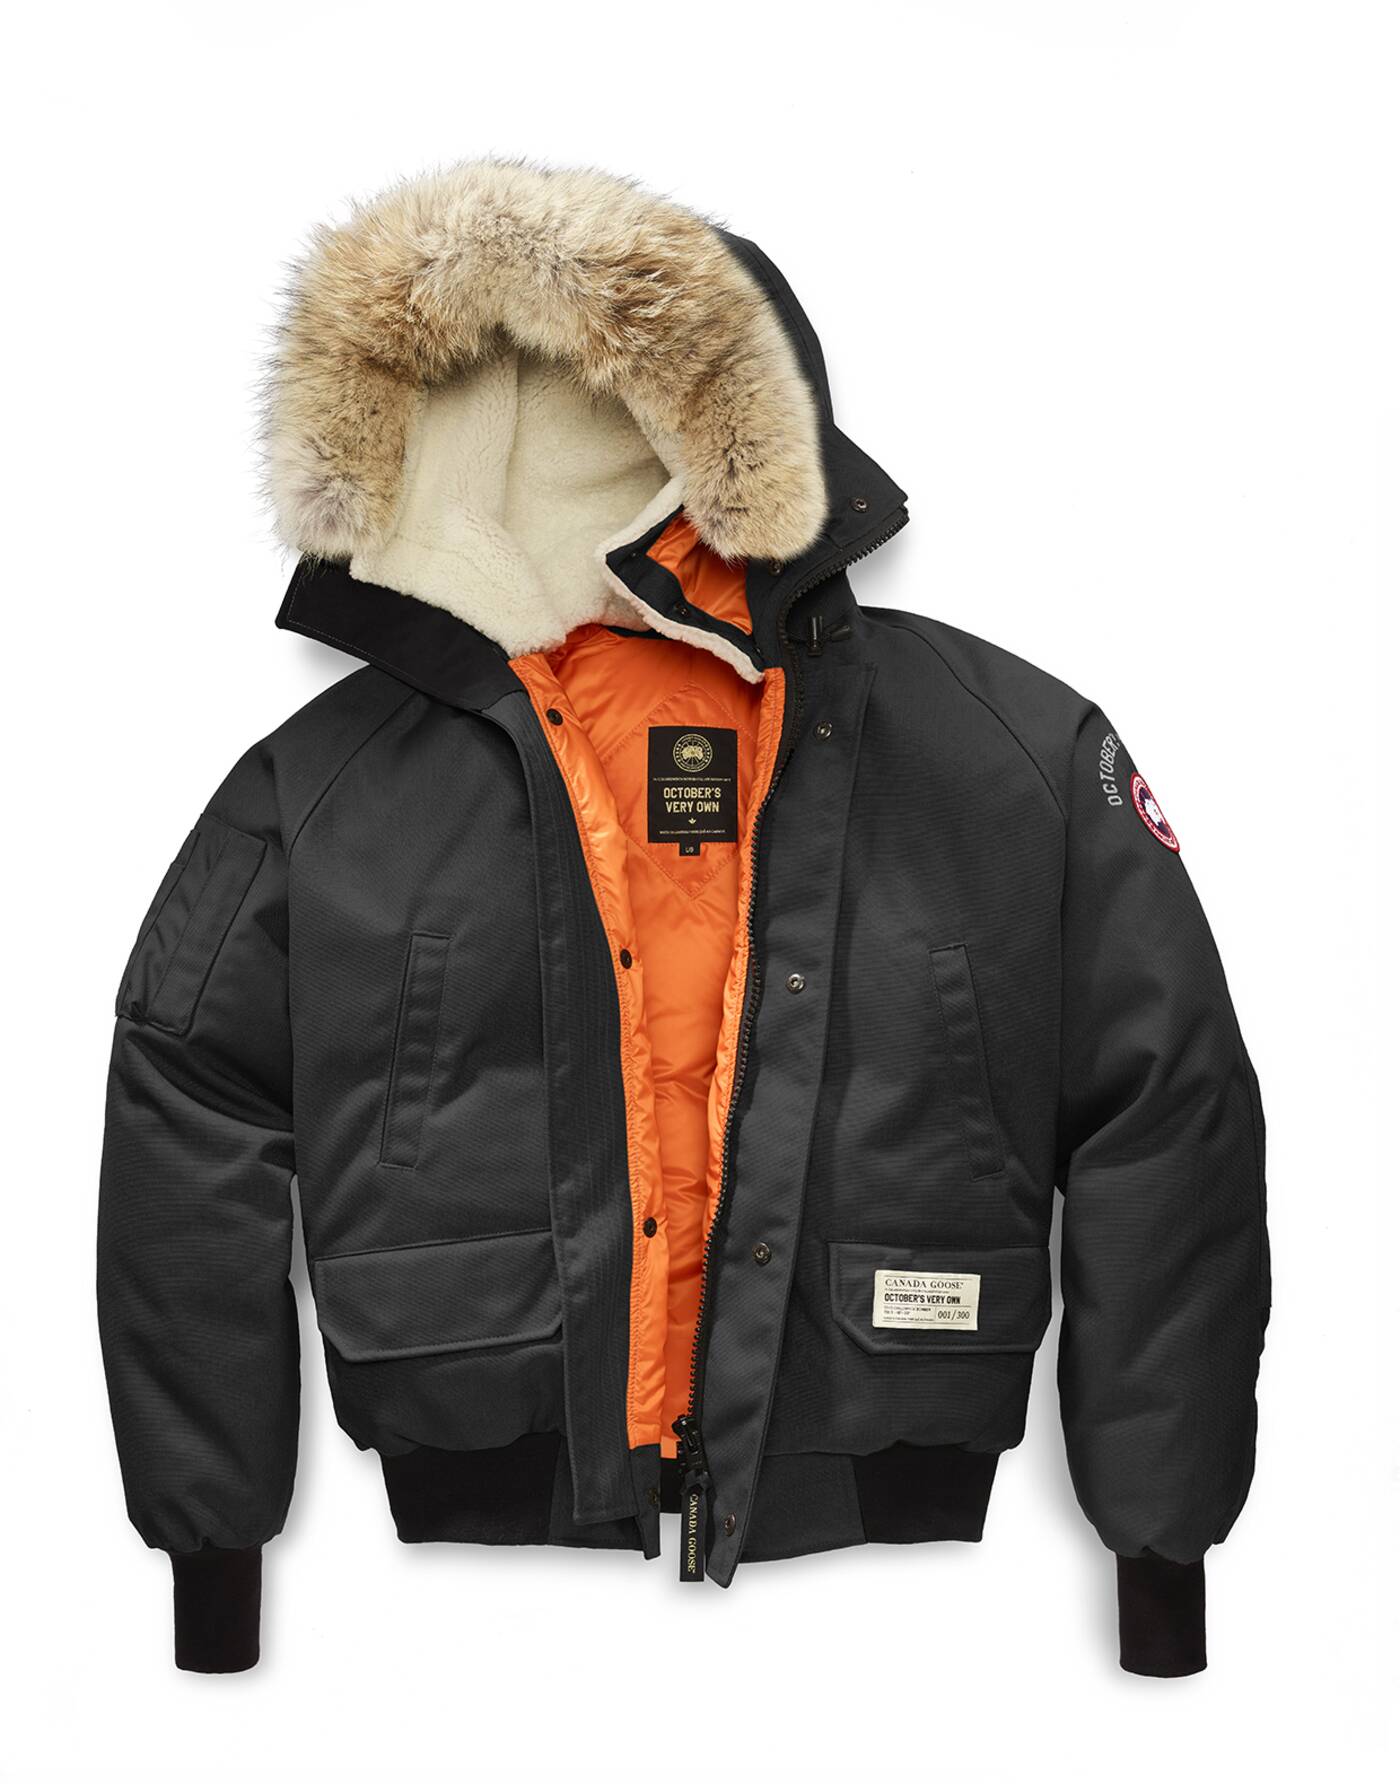 Drake and Canada Goose teaming up on winter jackets